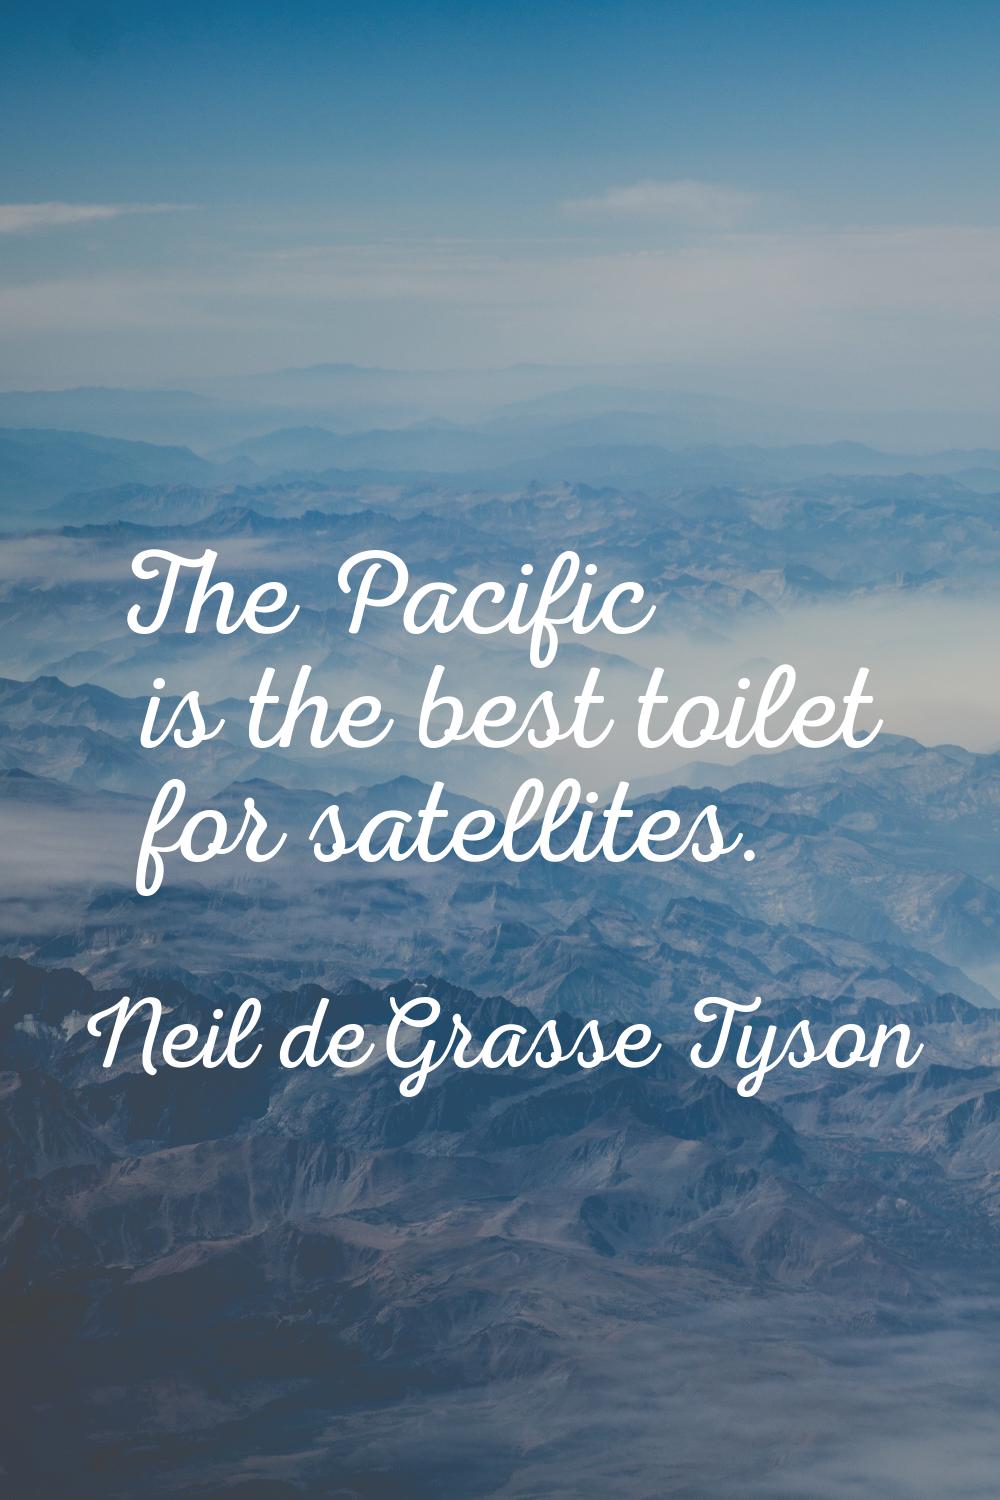 The Pacific is the best toilet for satellites.